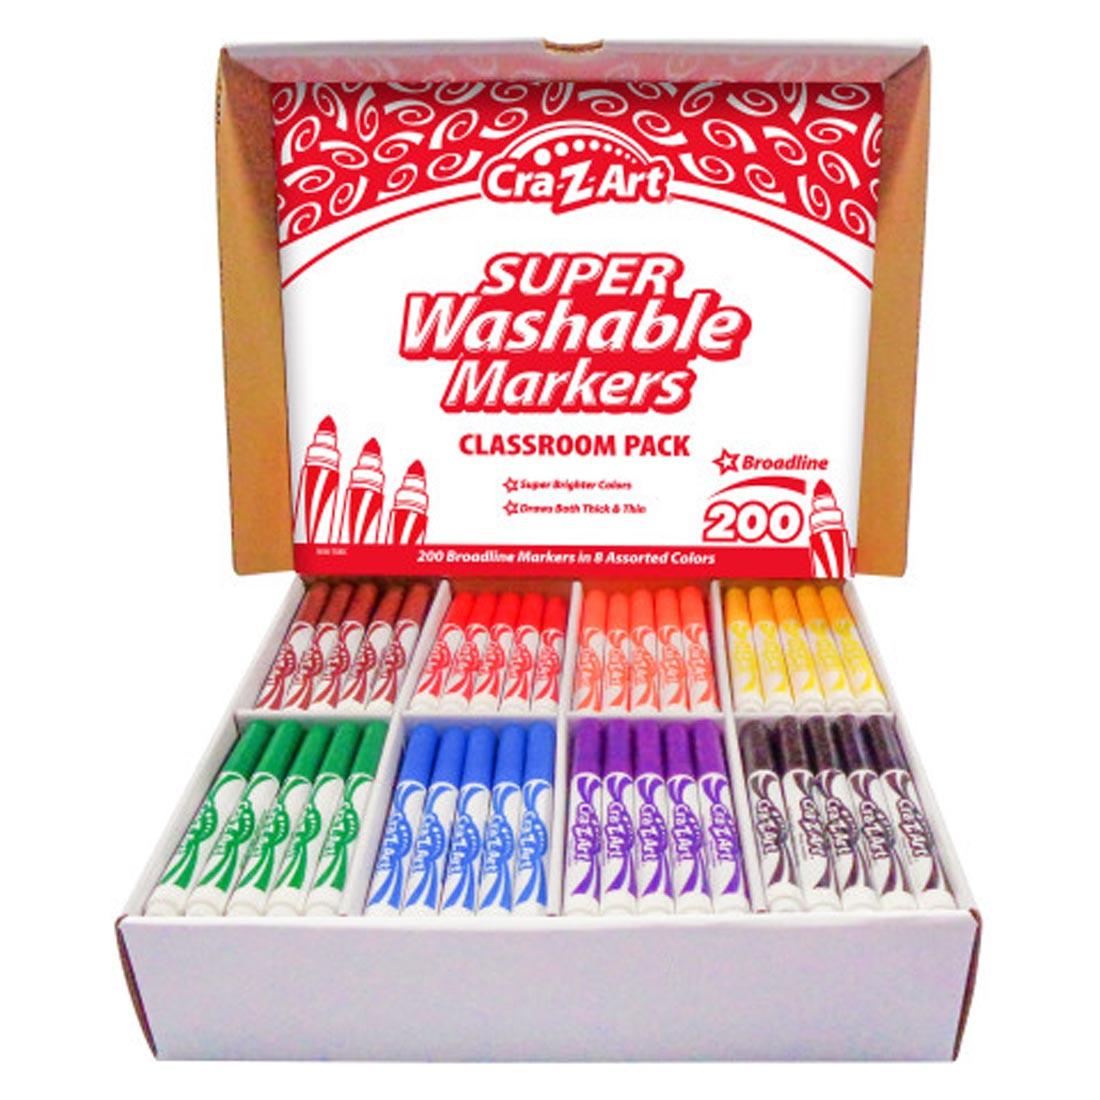 Cra-Z-Art Super Washable Markers 200-Count Classroom Pack